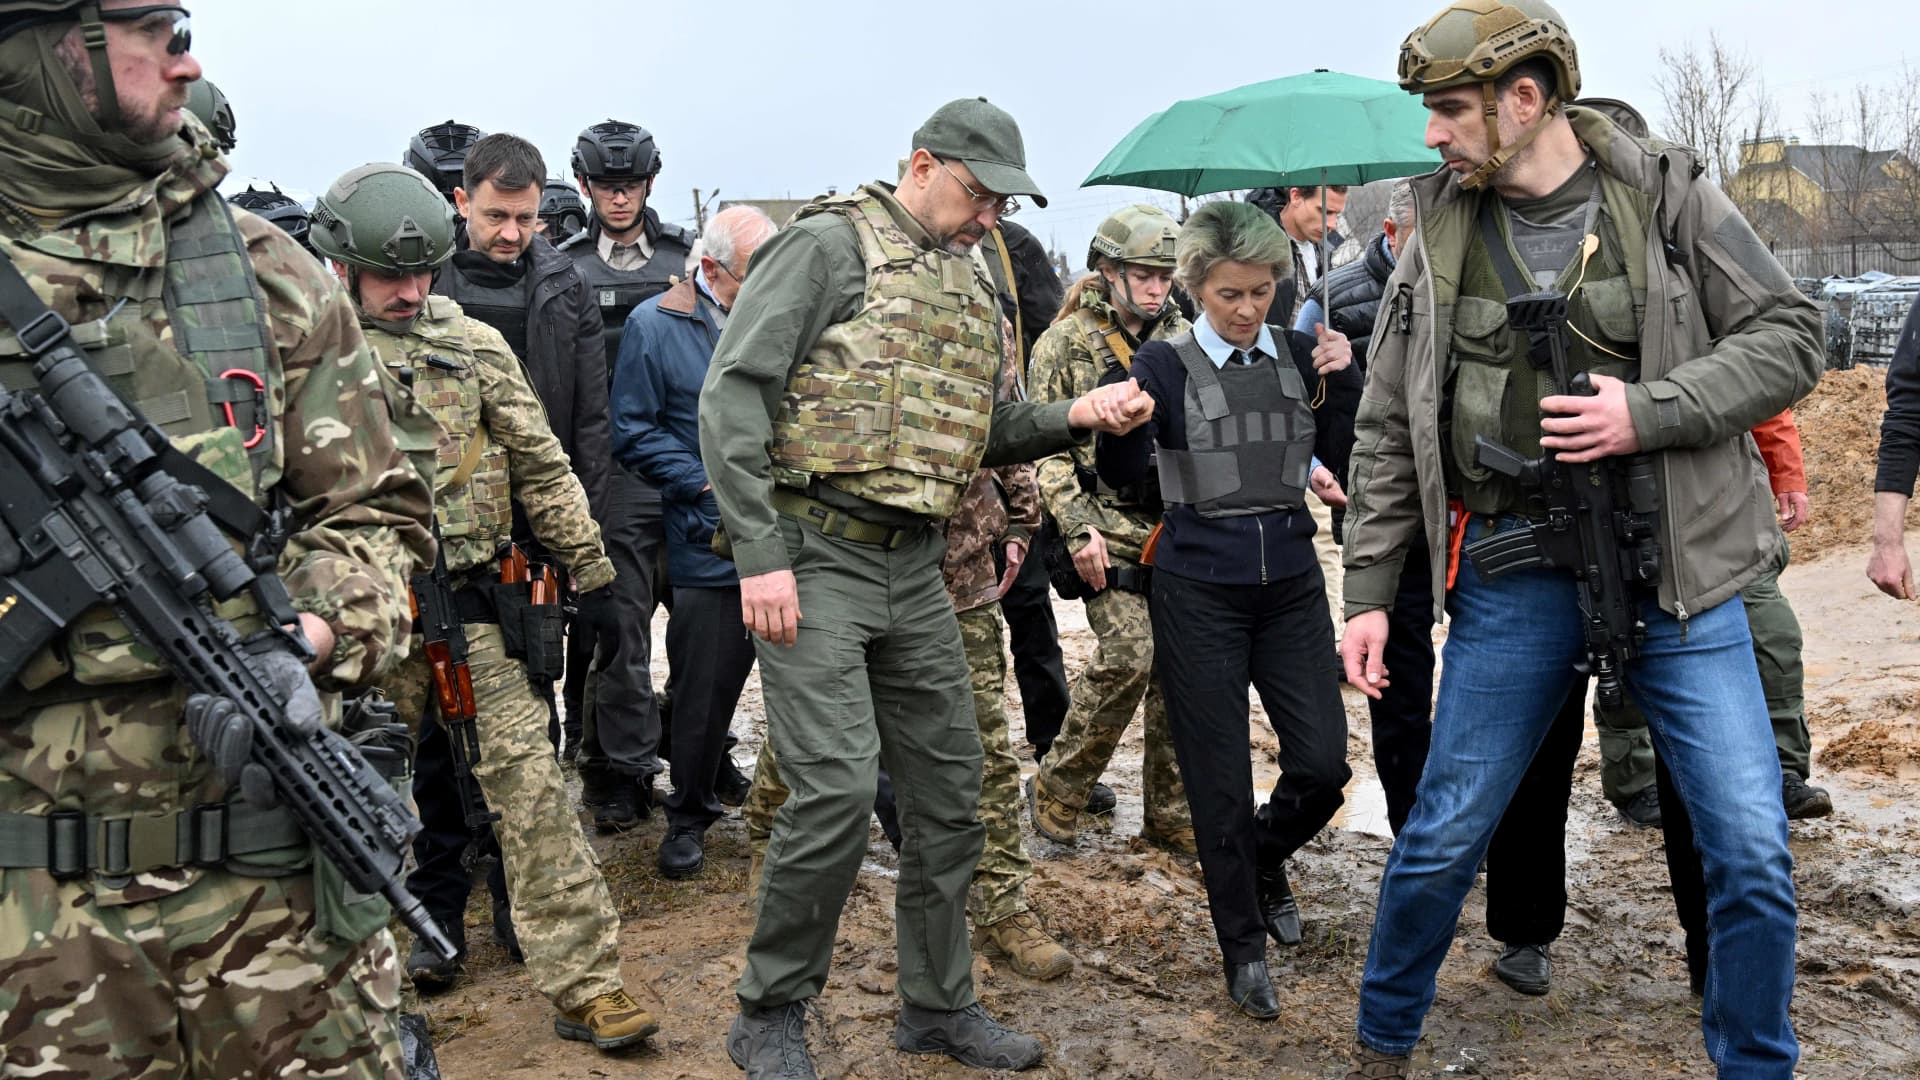 Ukrainian Prime Minister Denys Shmyhal helps European Commission President Ursula von der Leyen across the mud during a visit with Slovakia's Prime Minister and European Union High Representative for Foreign Affairs and Security Policy to a mass grave in the town of Bucha, northwest of Kyiv on April 8, 2022.